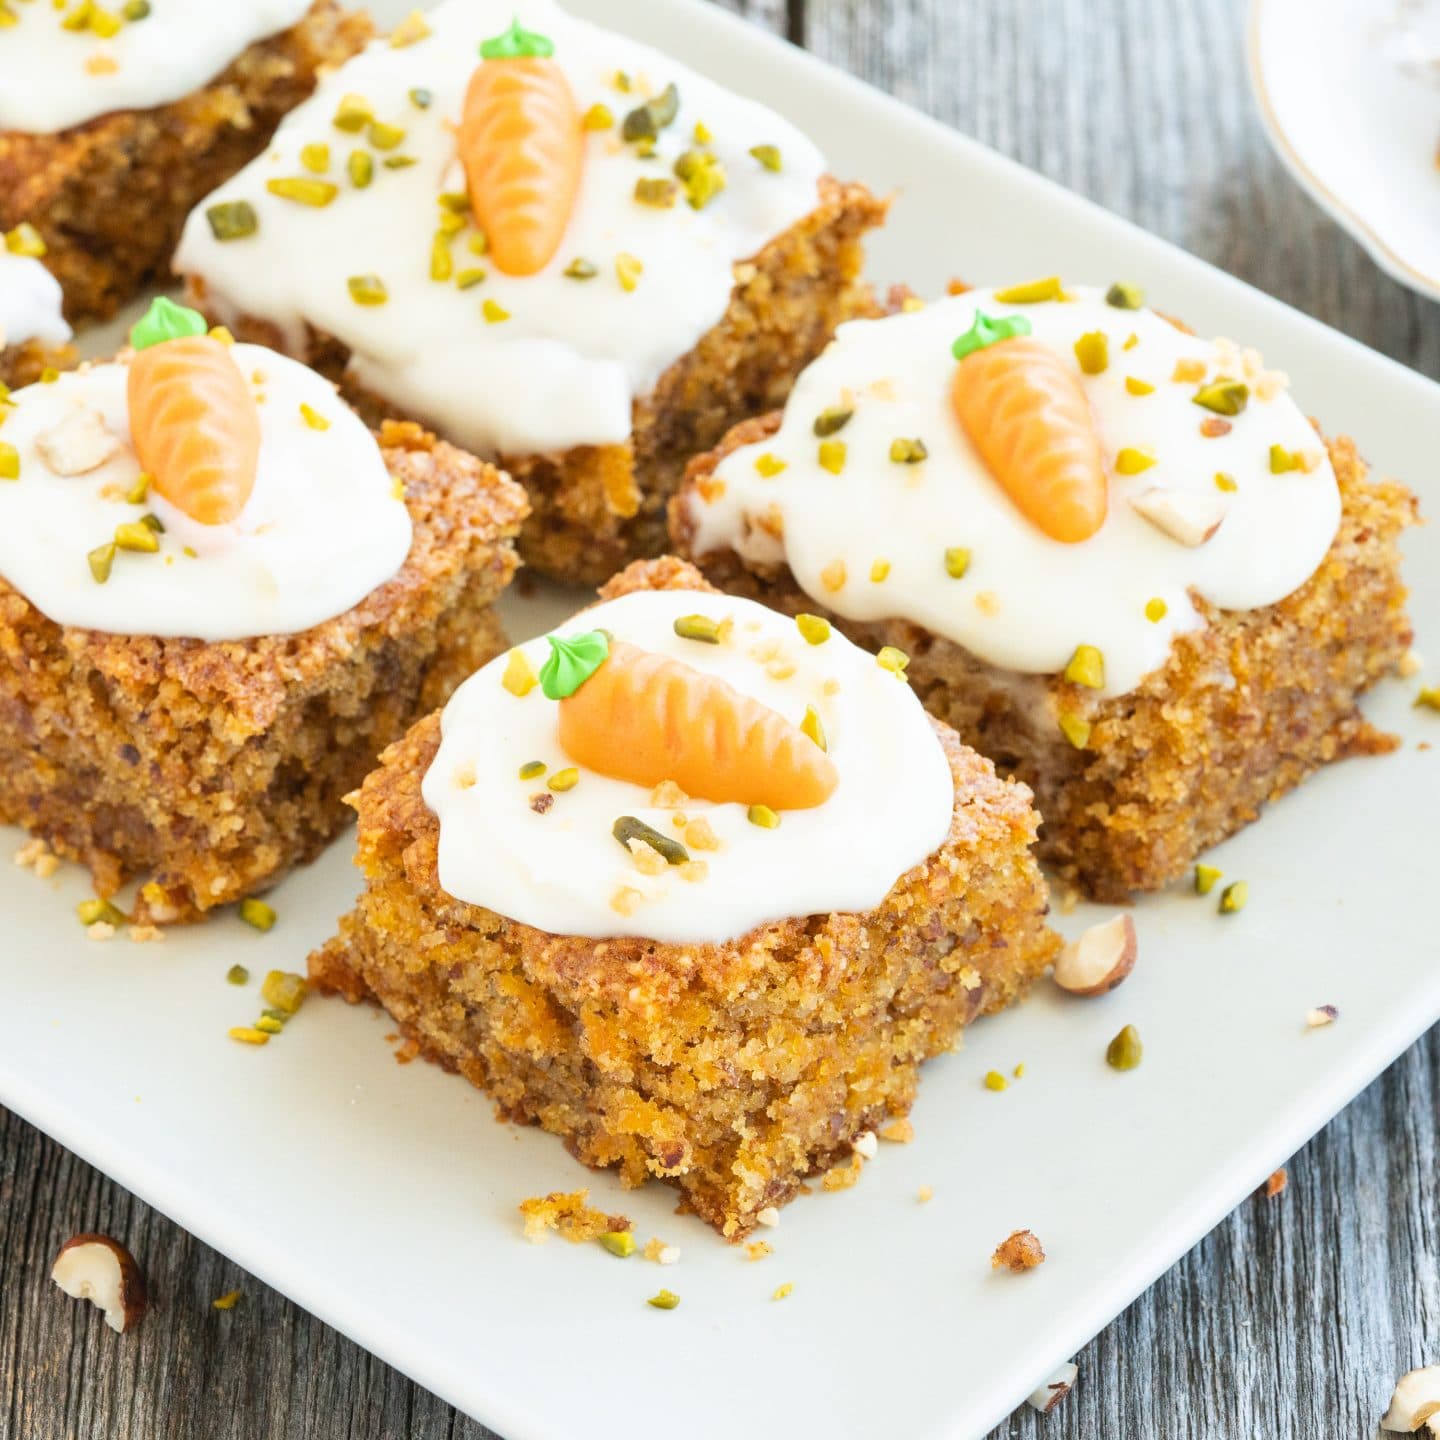 Keto Carrot Cake with Coconut Panna Cotta {dairy-free} - Dani's Cookings